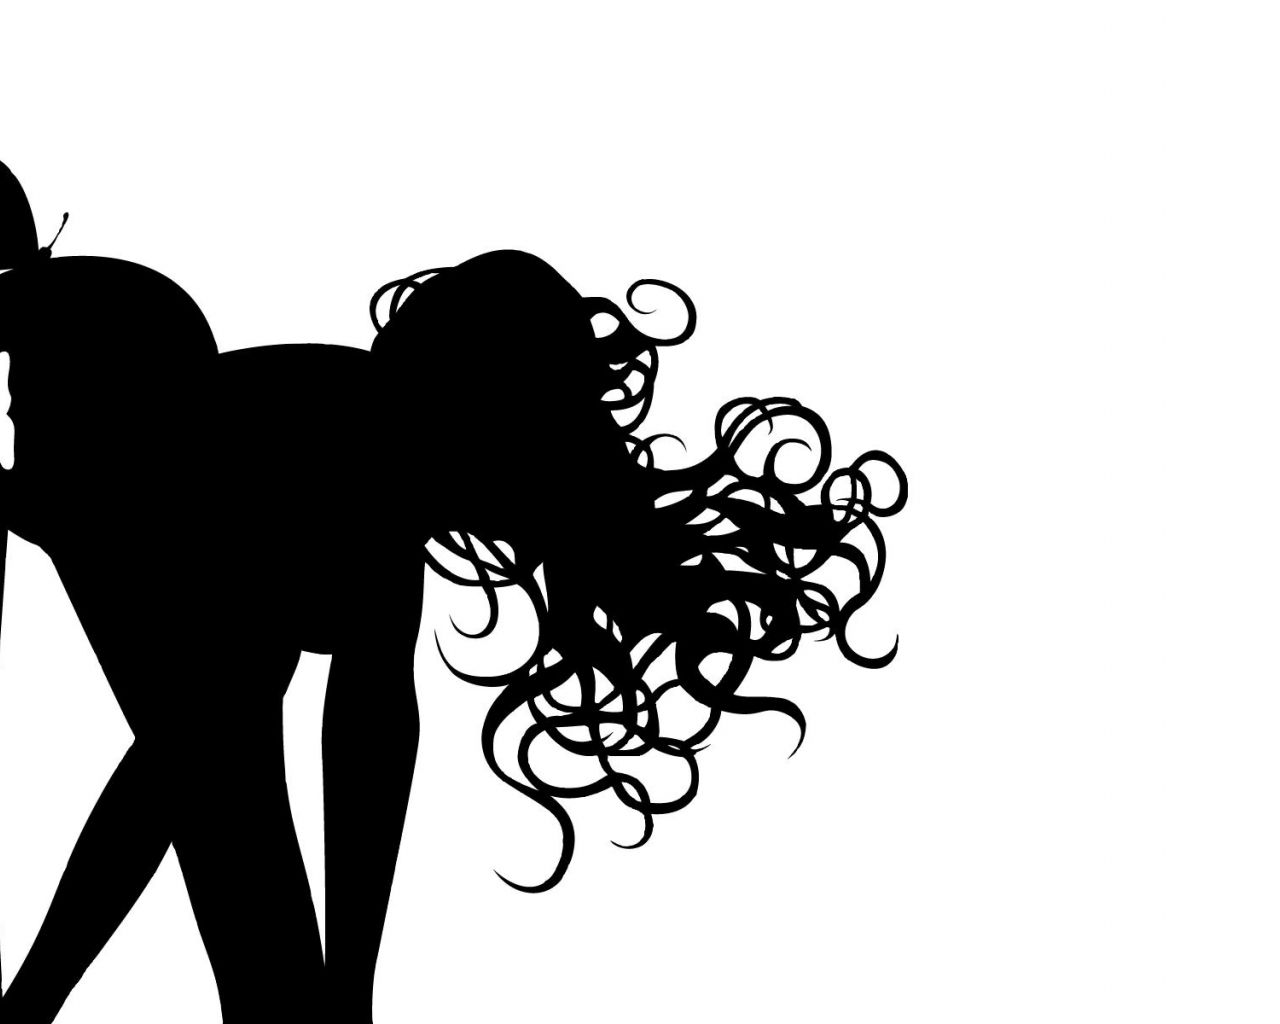 Free download Wallpaper butterfly silhouette hair Female silhouette graphic [1920x1200] for your Desktop, Mobile & Tablet. Explore Woman Silhouette Wallpaper. Silhouette Wallpaper for Walls, Tree Silhouette Wallpaper, Modern Silhouettes Wallpaper